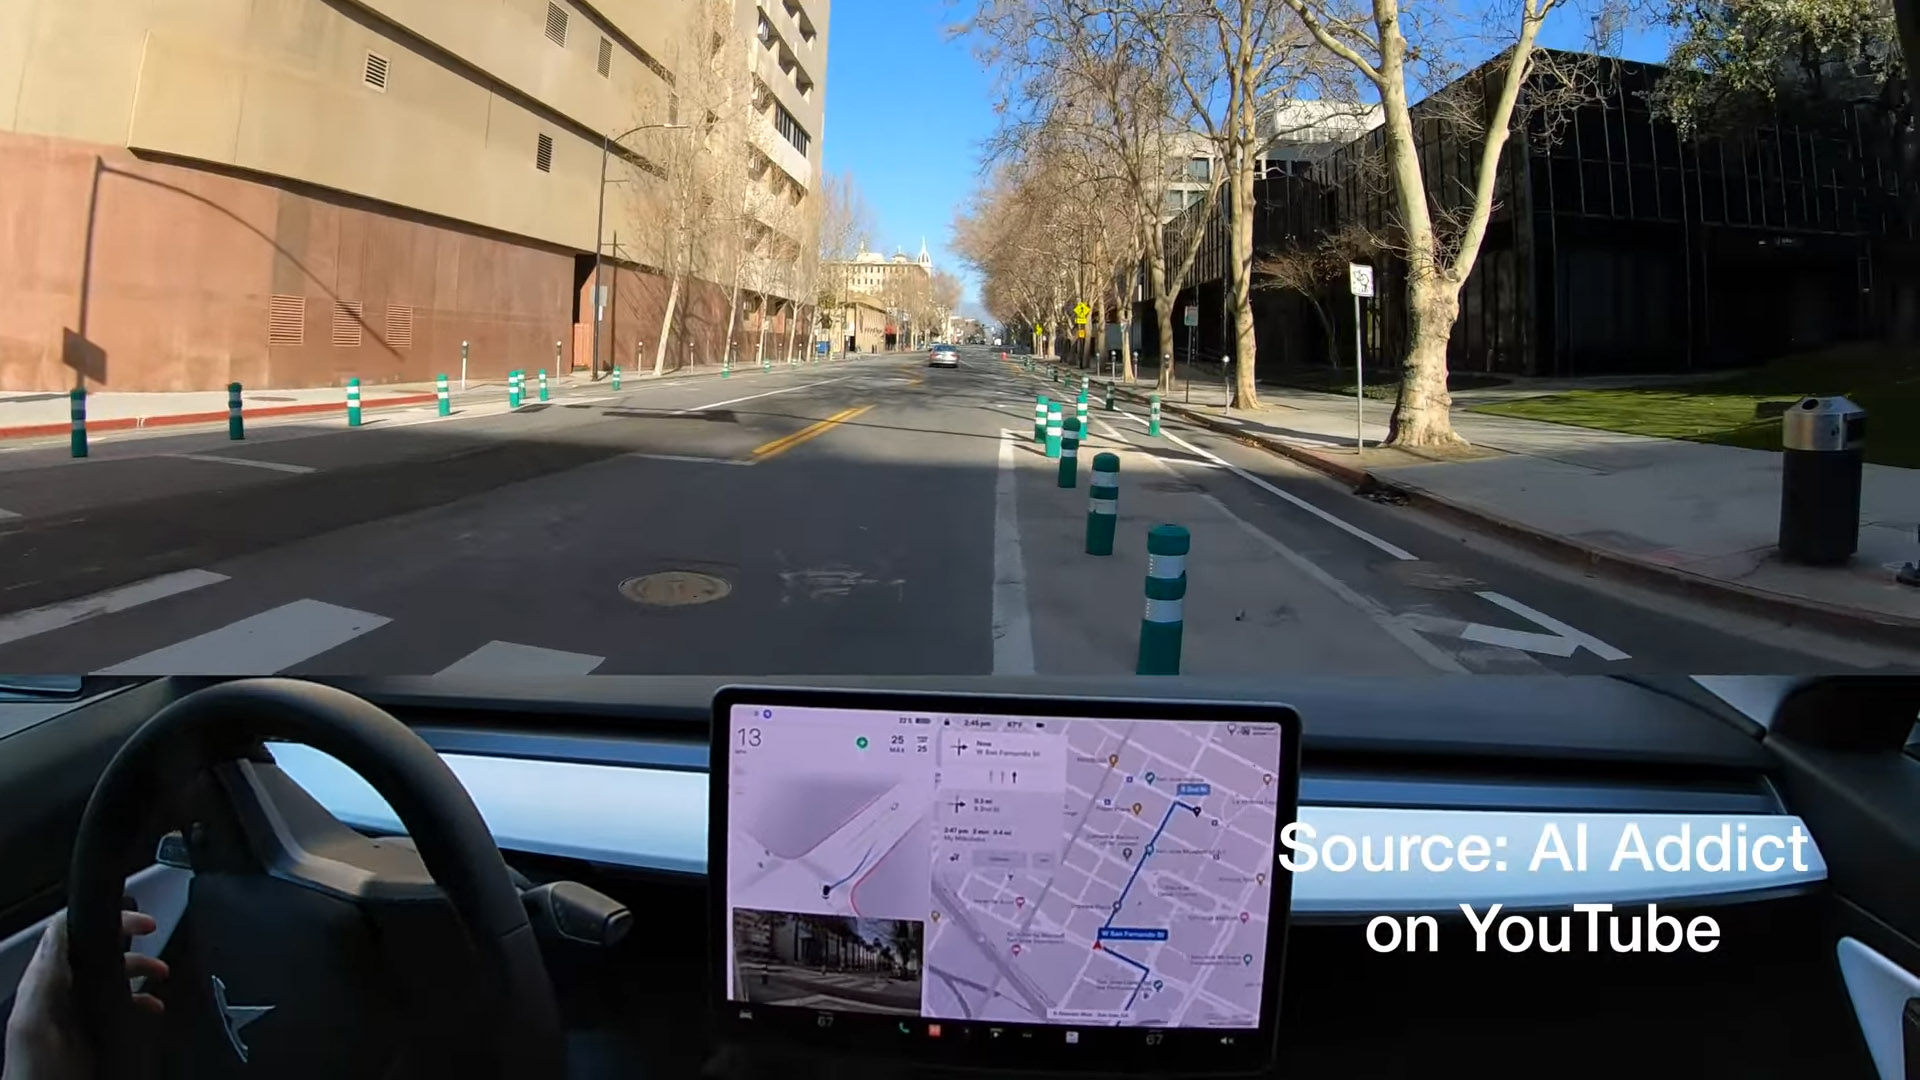 YouTuber catches the first self-driving Tesla car accident evidence on video as it happened